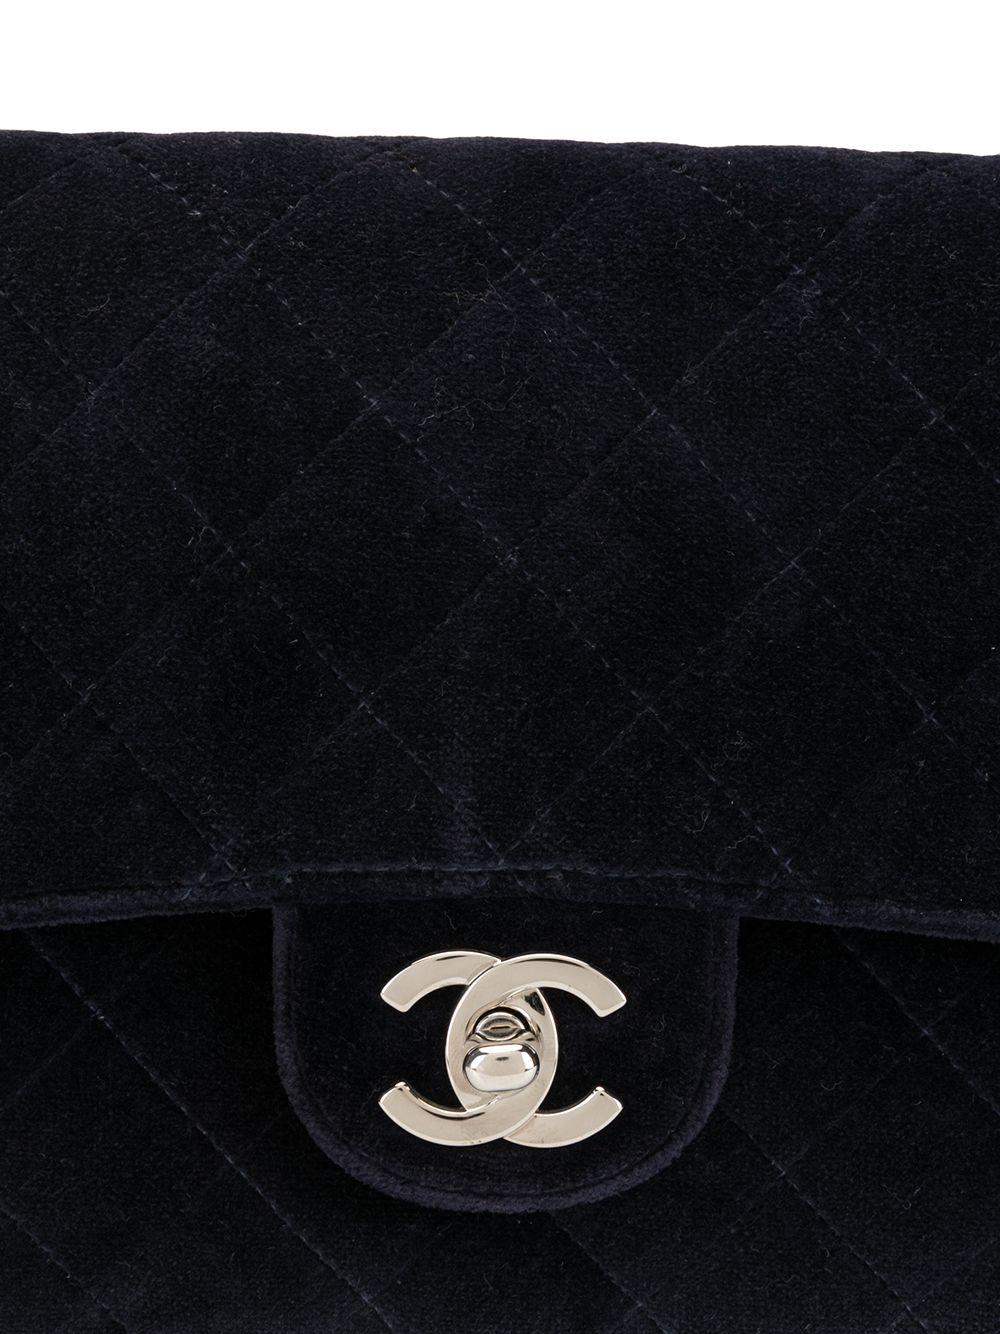 Chanel 1996 Vintage Rare Medium Classic Flap Navy Blue Velvet Quilted Backpack For Sale 5